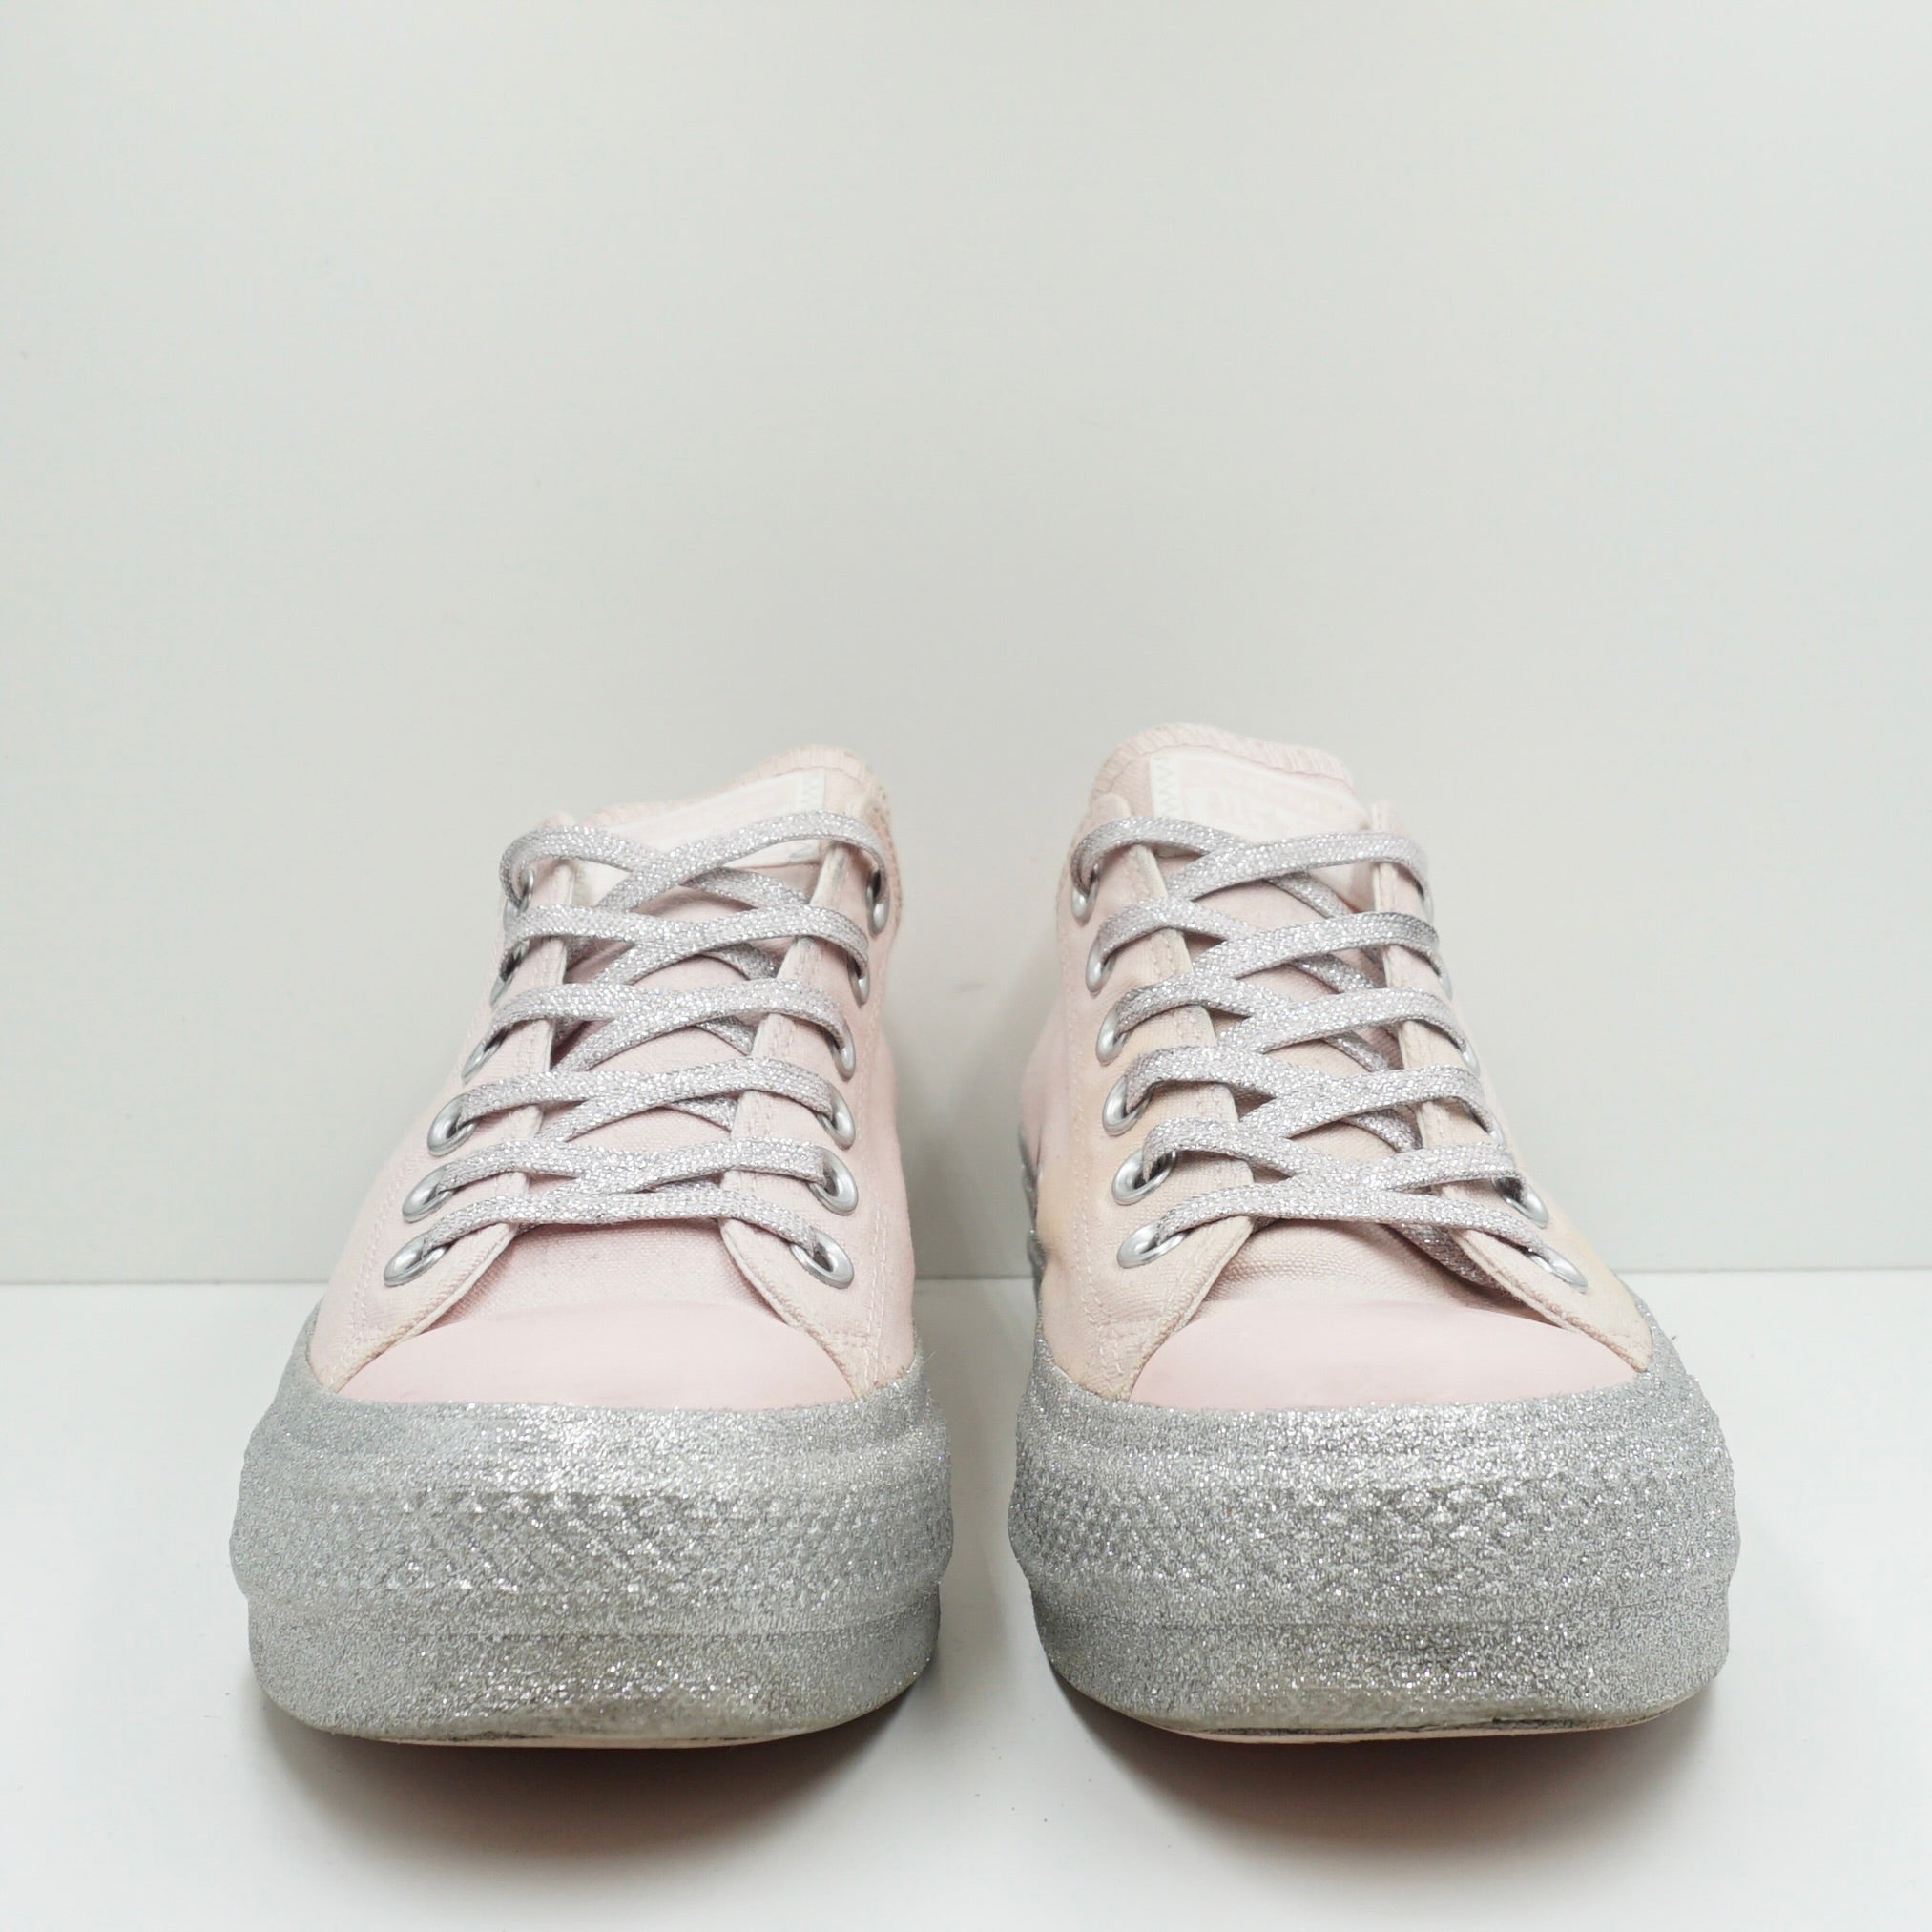 Converse Chuck Taylor All Star Lift Low Miley Cyrus Pink (W)